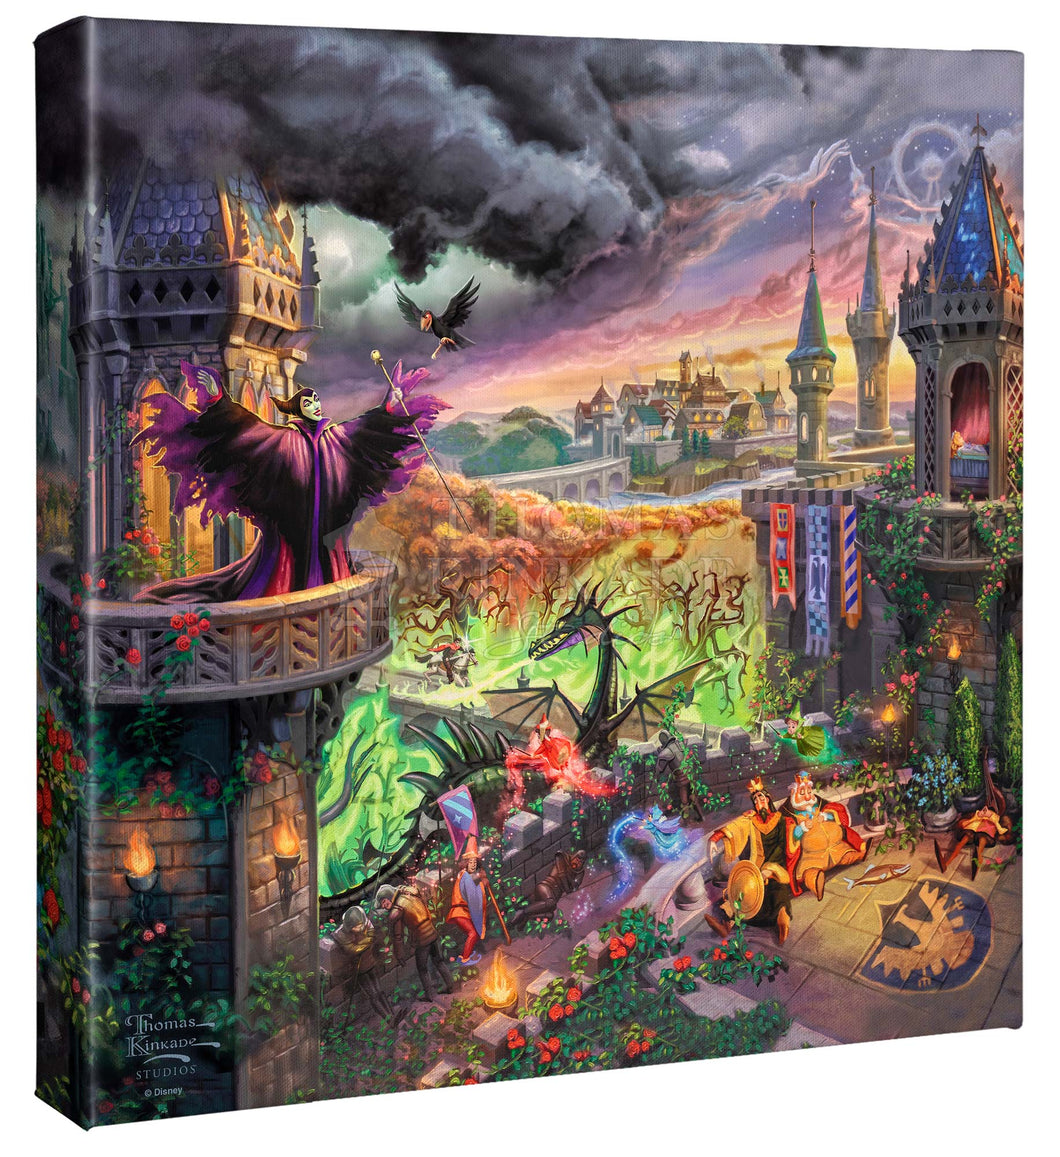 Disney Maleficent - Gallery Wrapped Canvas